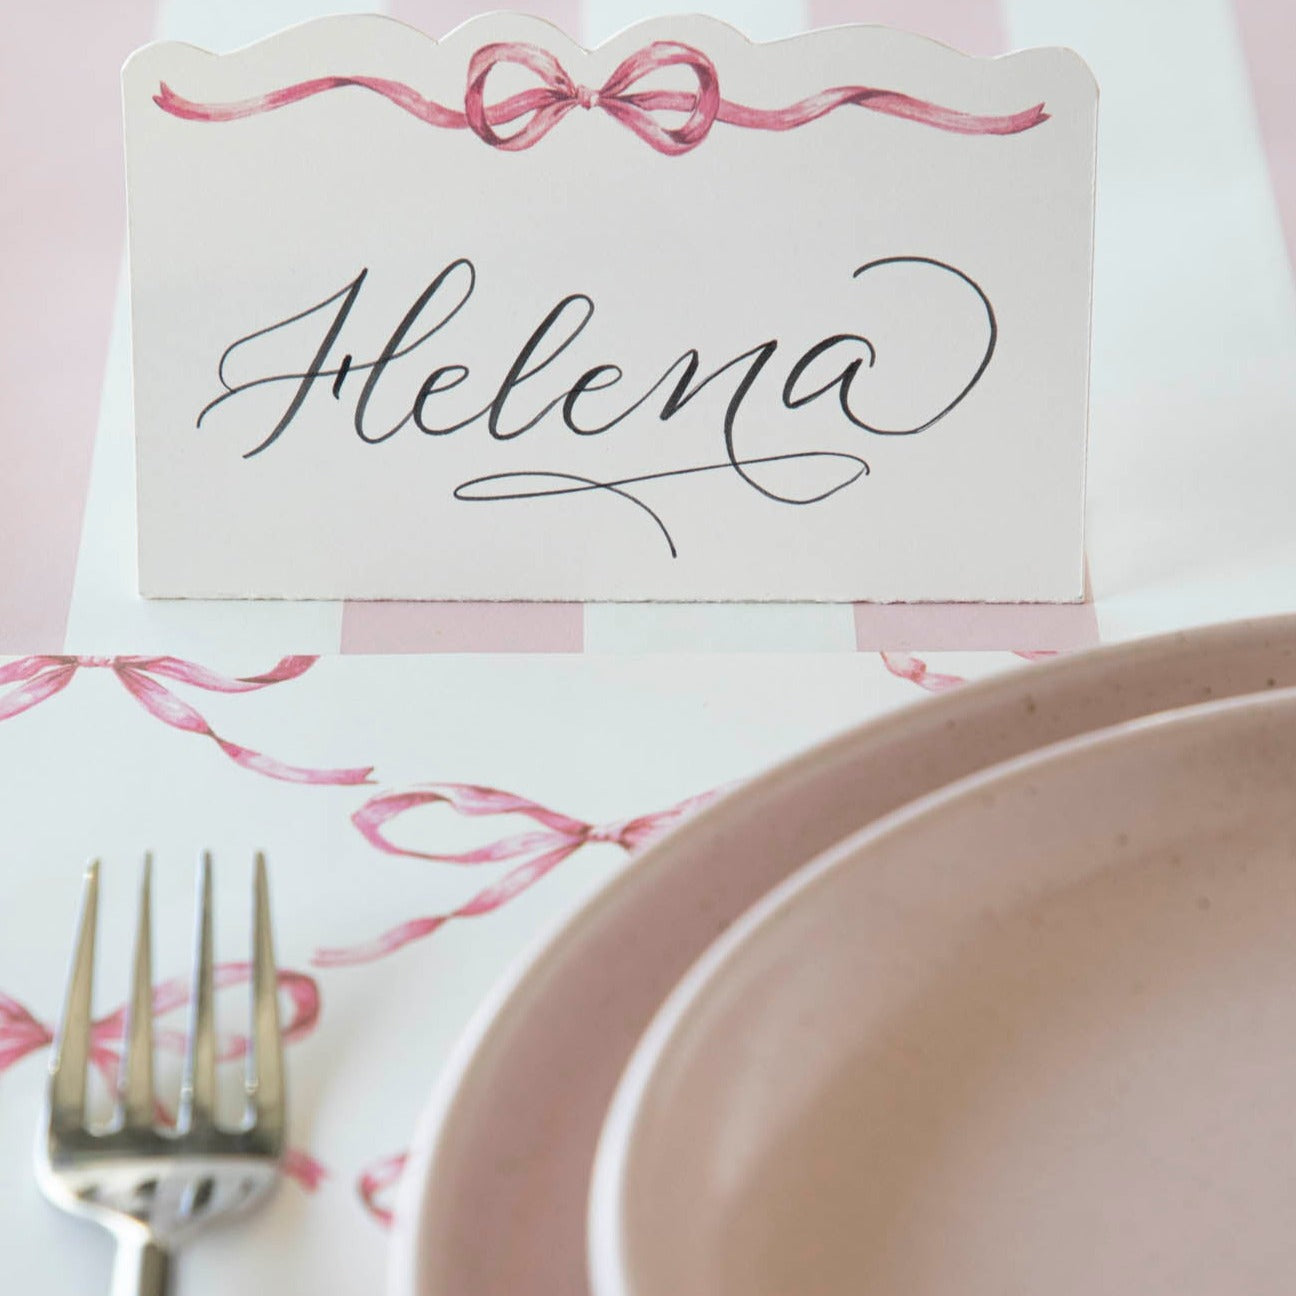 A Hester &amp; Cook Pink Bow Place Card is placed on a table, adding loveliness to the setting.